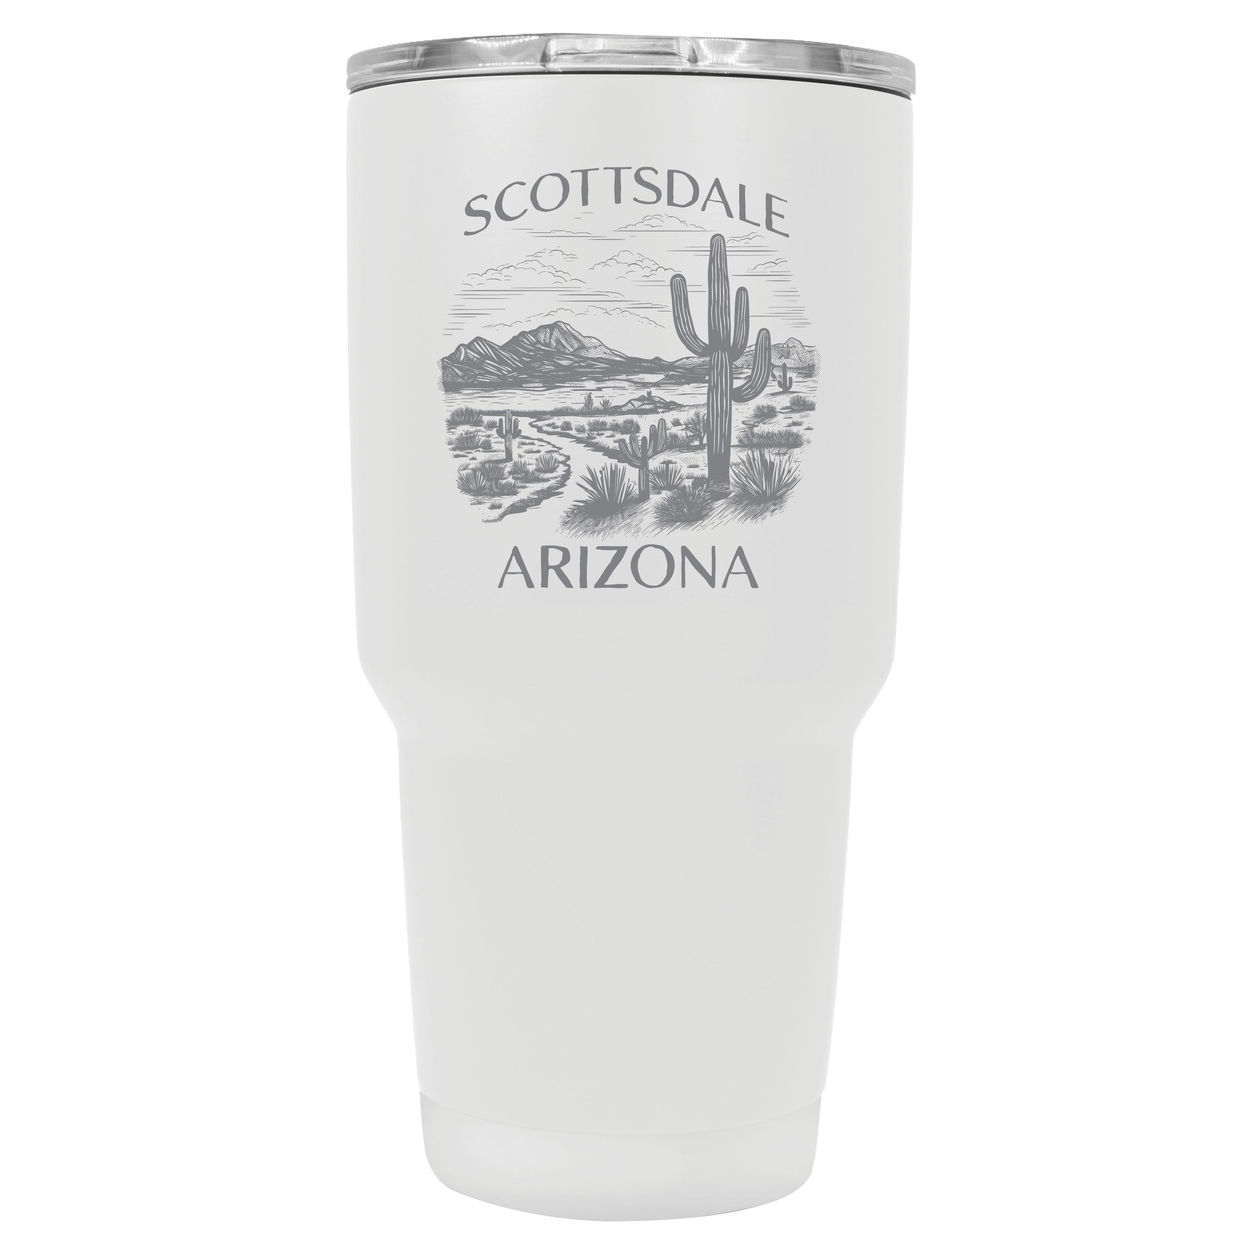 Scottsdale Arizona Souvenir 24 Oz Engraved Insulated Stainless Steel Tumbler - Coral,,4-Pack